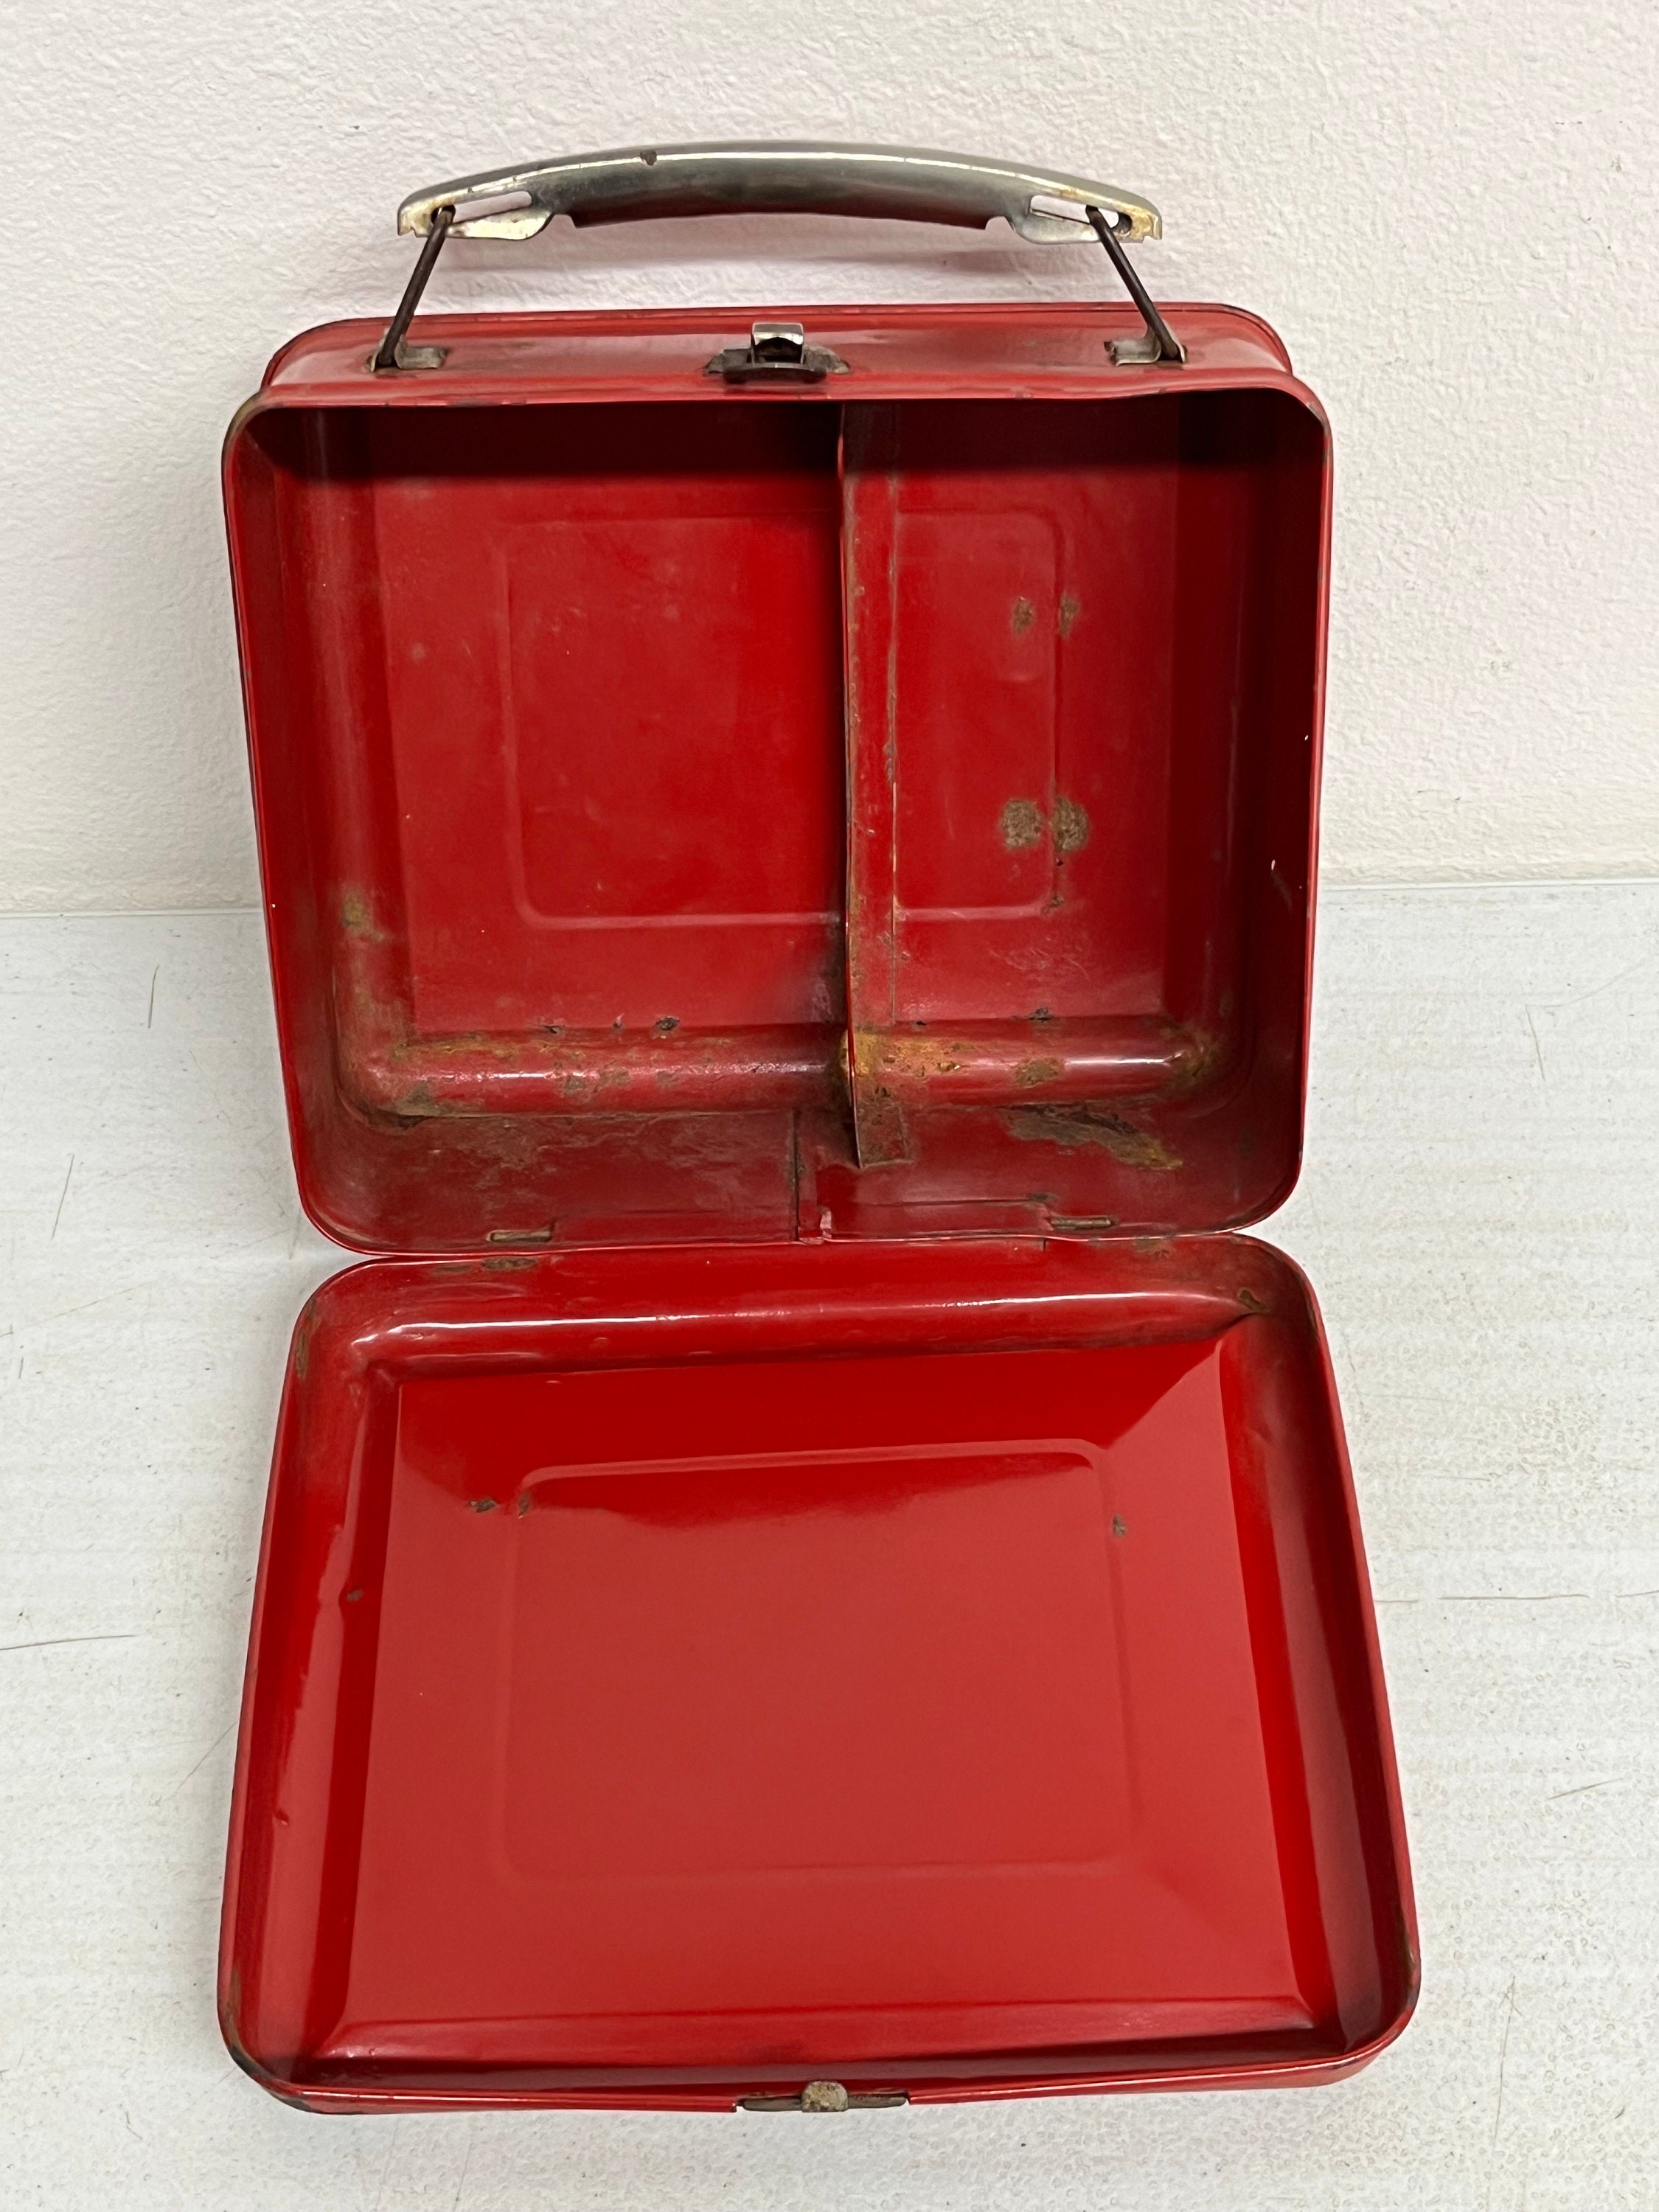 SPACE LUNCH TO GO – ART. 864 / 865 Electric lunch box space saver - MACOM